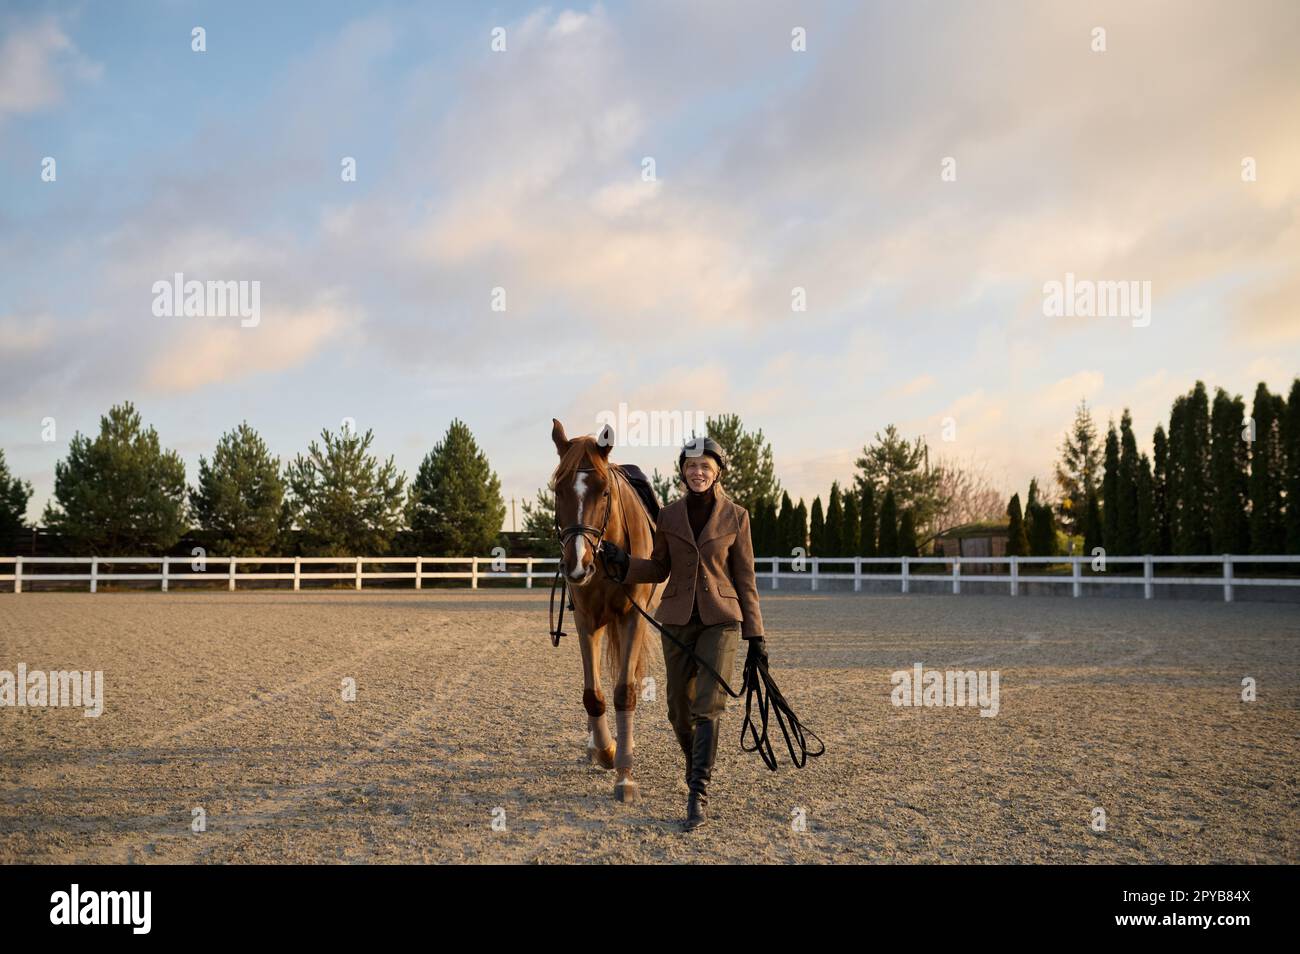 Woman rider walking horse side by side holding harness saddle-girth Stock Photo